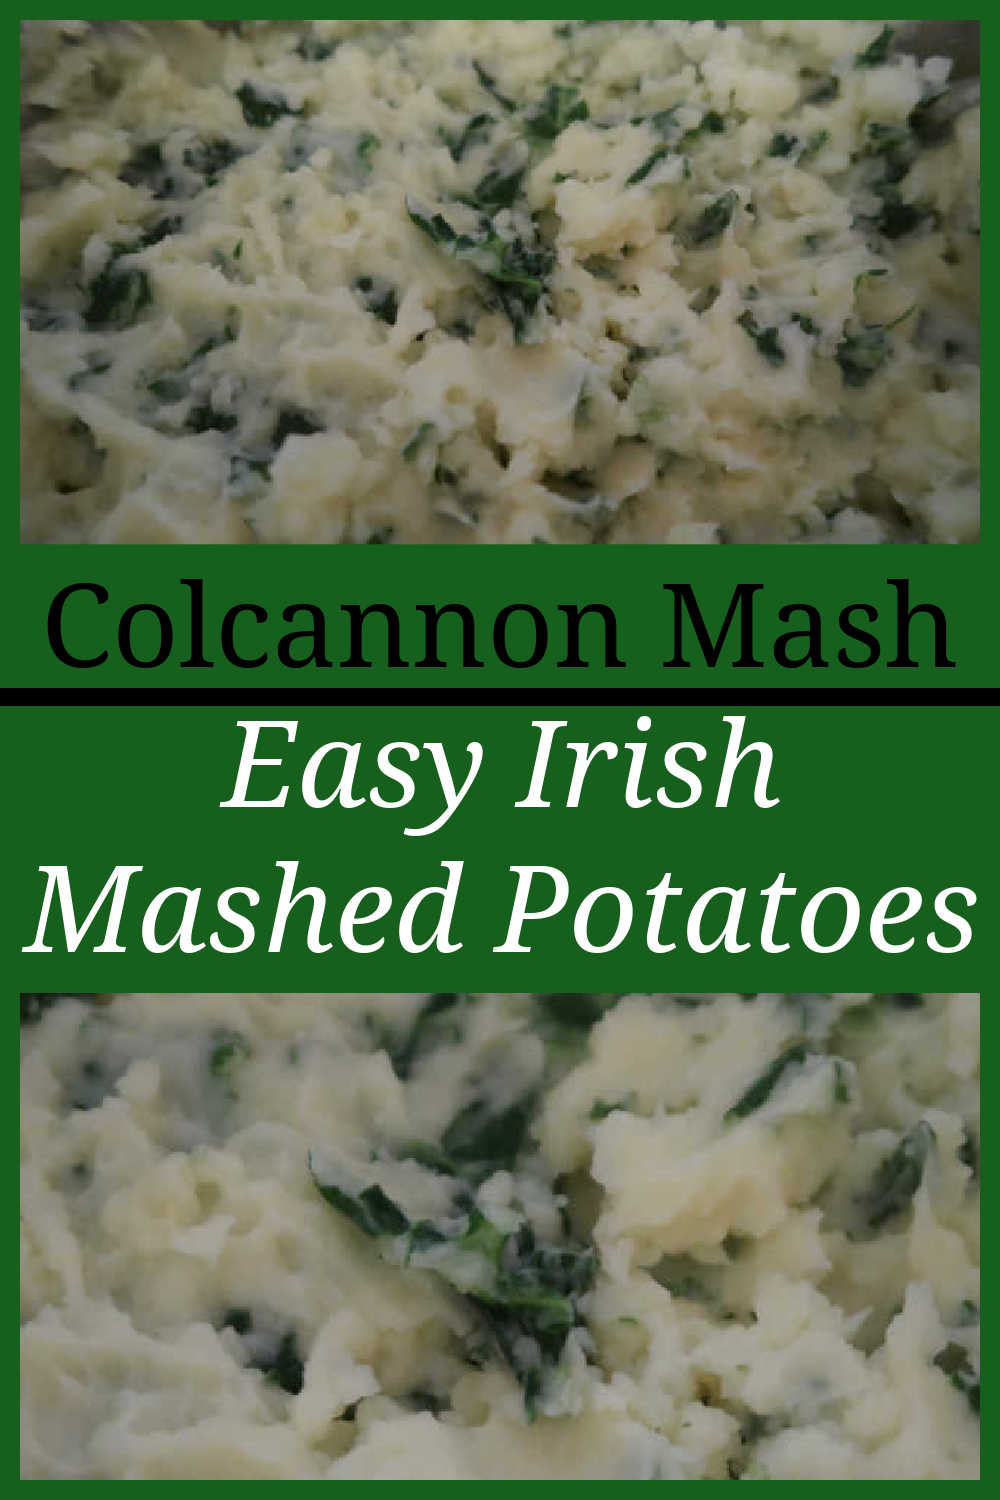 Colcannon Mash Recipe - How to make the best, easy, creamy traditional Irish mashed potatoes with kale or cabbage - with the full video tutorial.